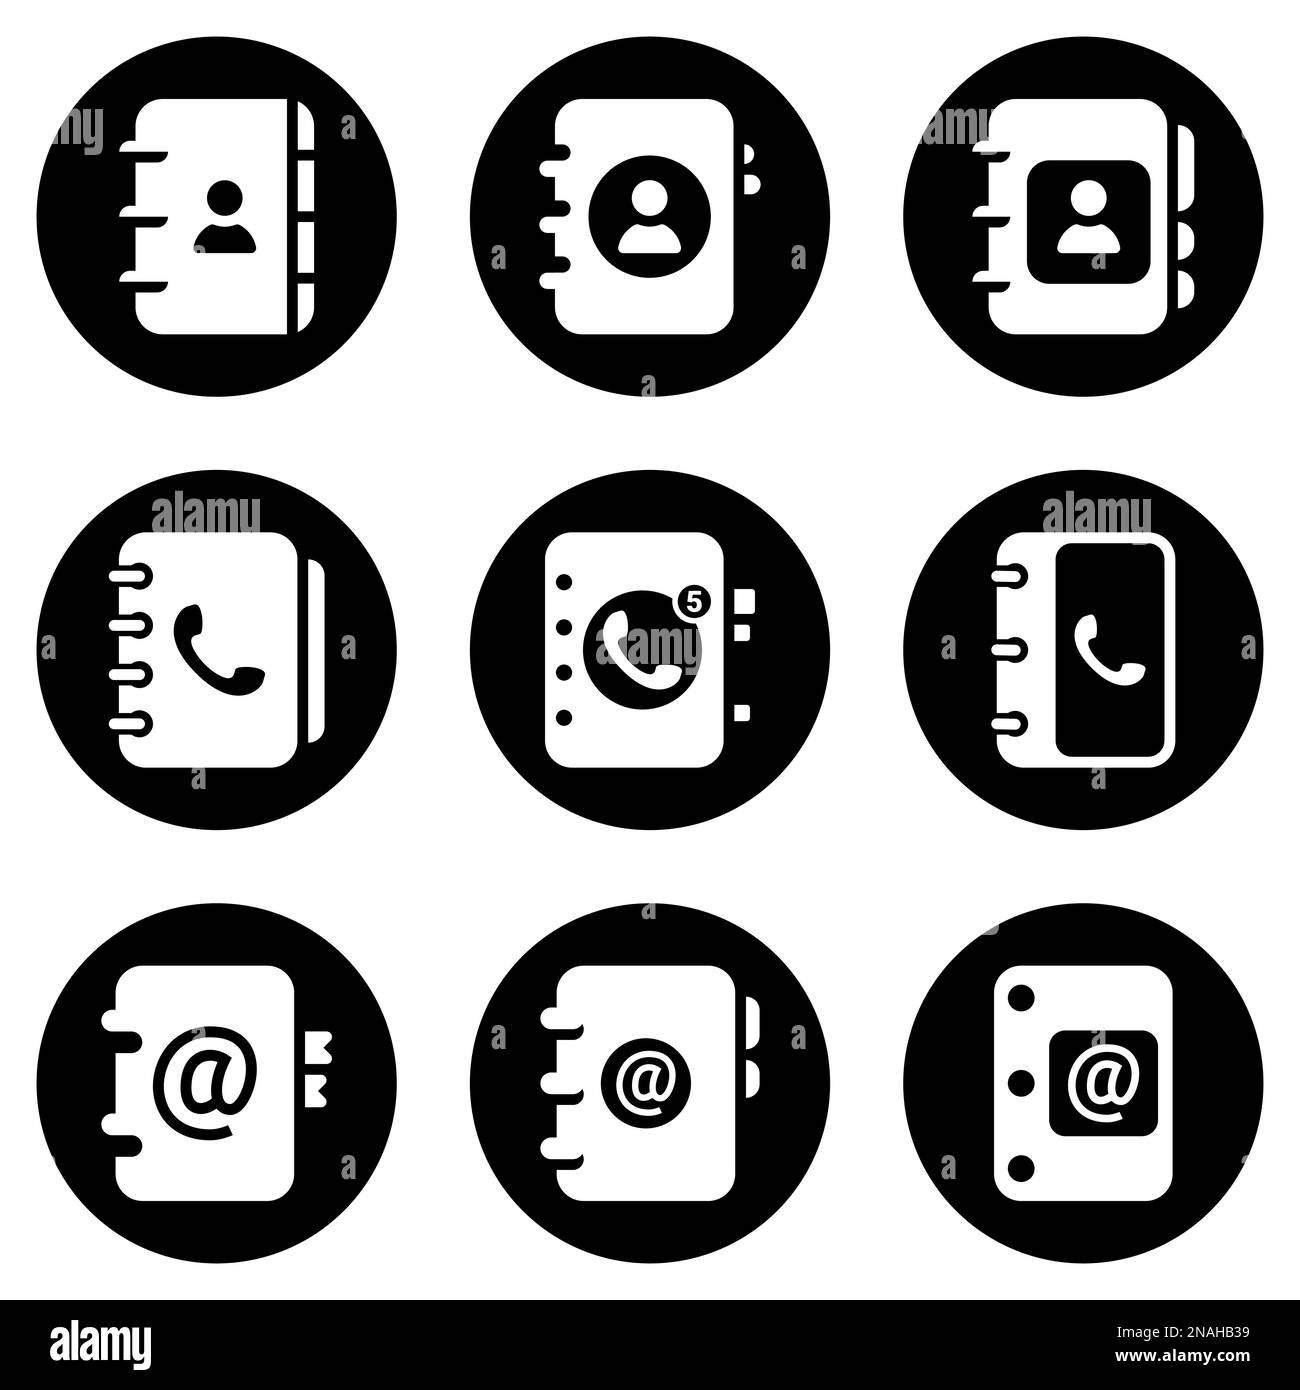 Set of white icons isolated against a black background, on a theme Address Book Stock Vector